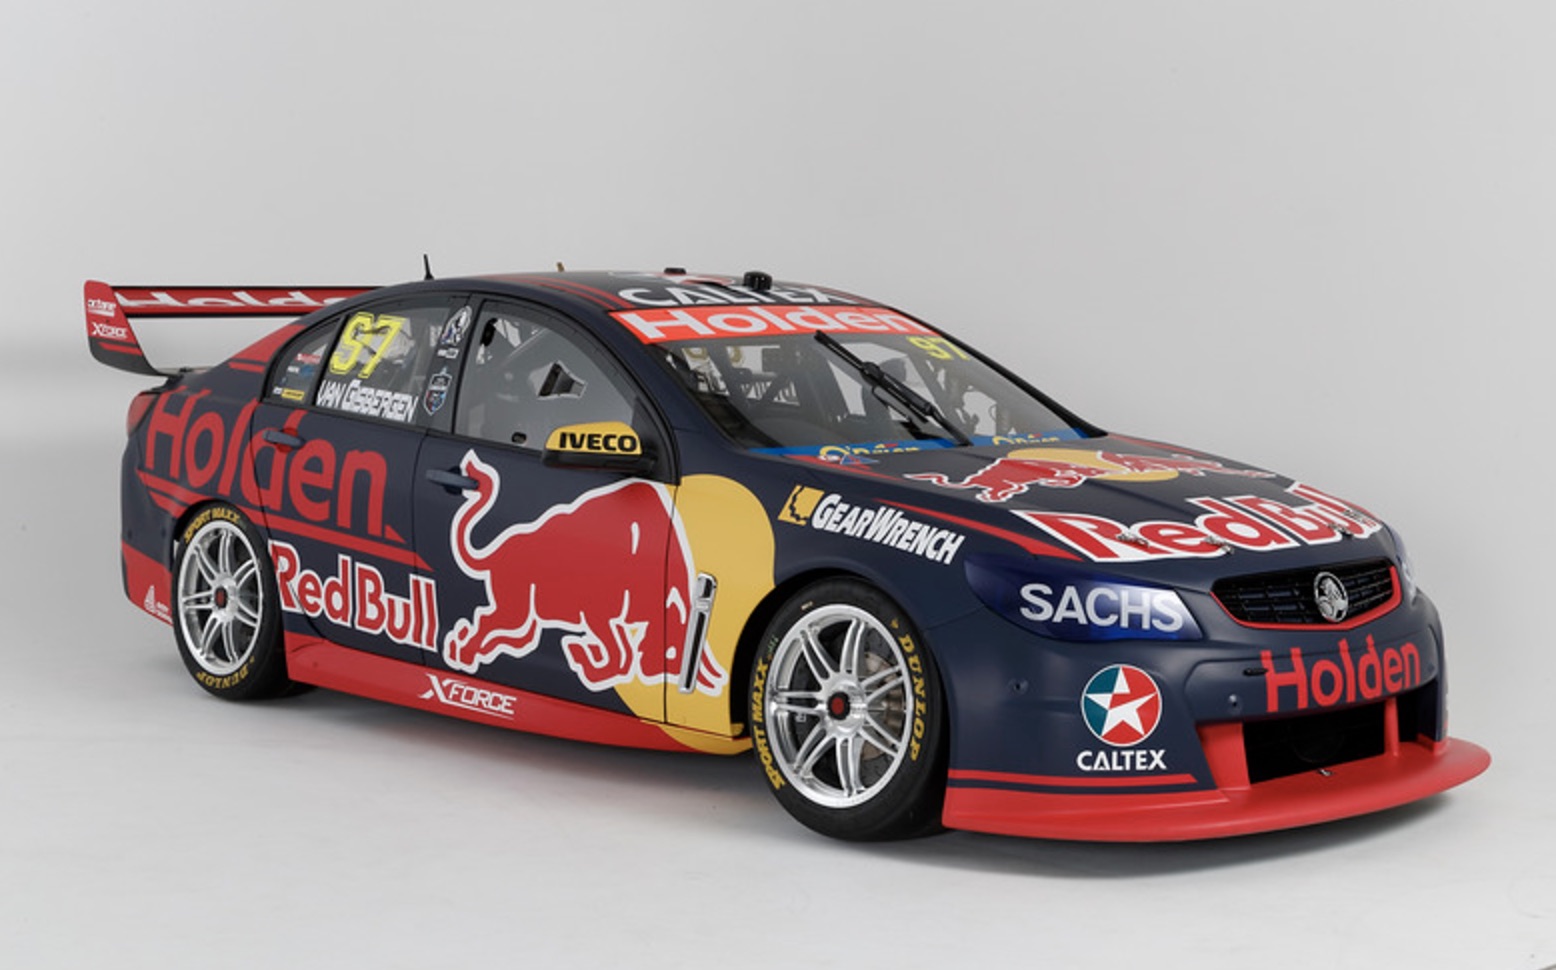 Holden Red Bull Racing Reveal New Livery